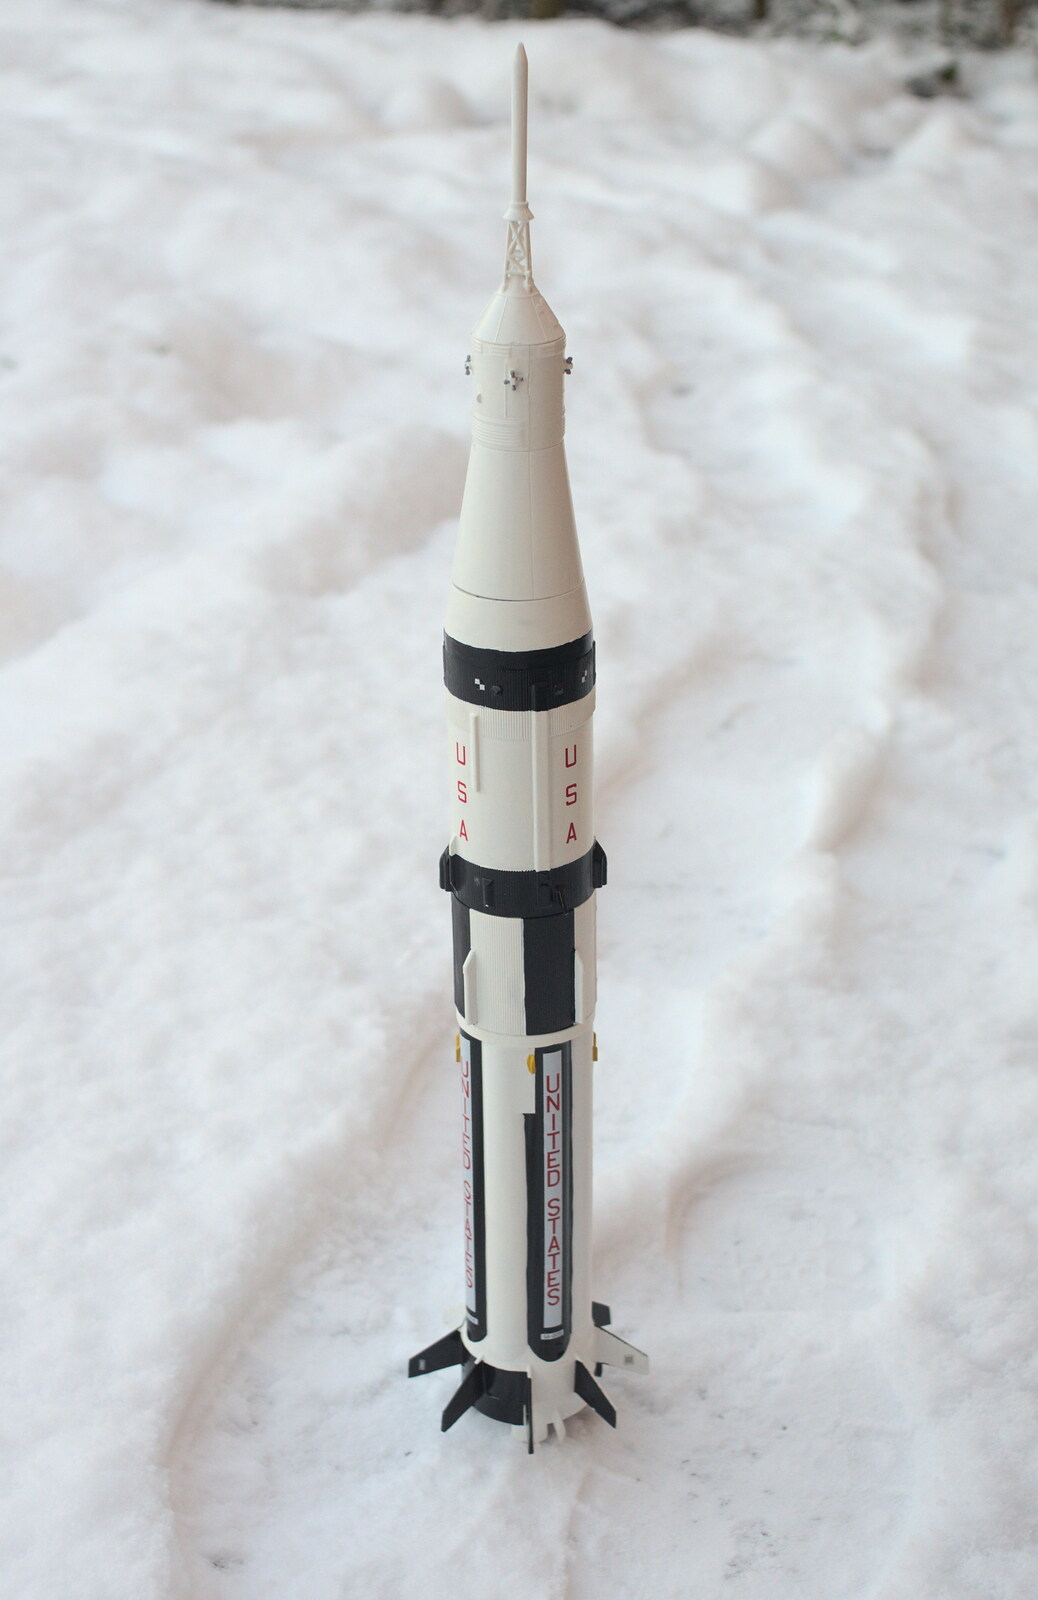 Fred's Saturn 1B outside the front door from A Couple of Snow Days, Brome, Suffolk - 16th January 2013